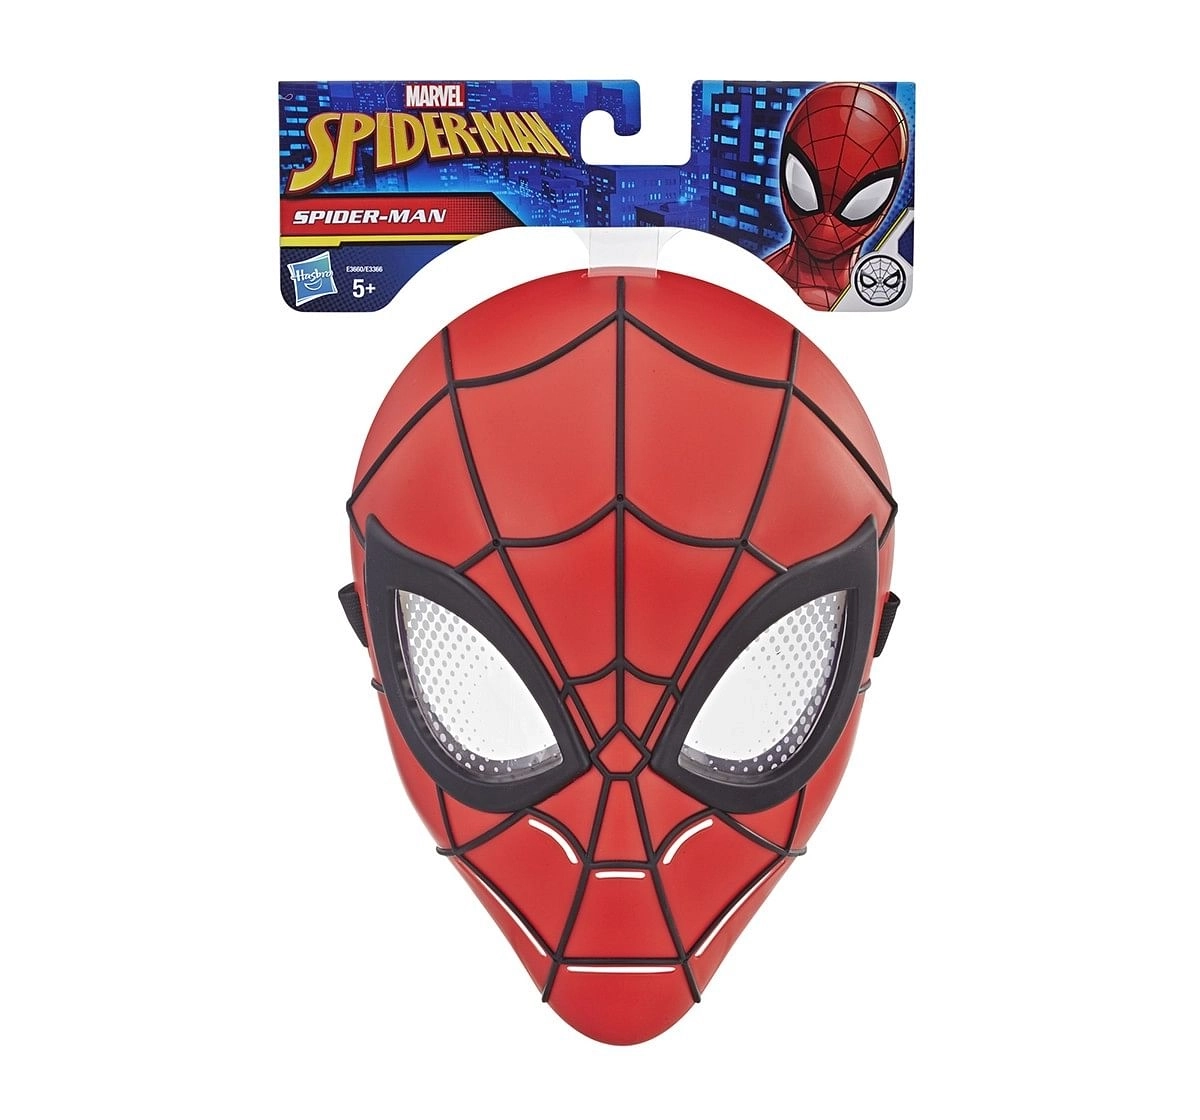 Marvel Spider-Man Hero Mask Assorted Action Figure Play Sets for Kids age 5Y+ 